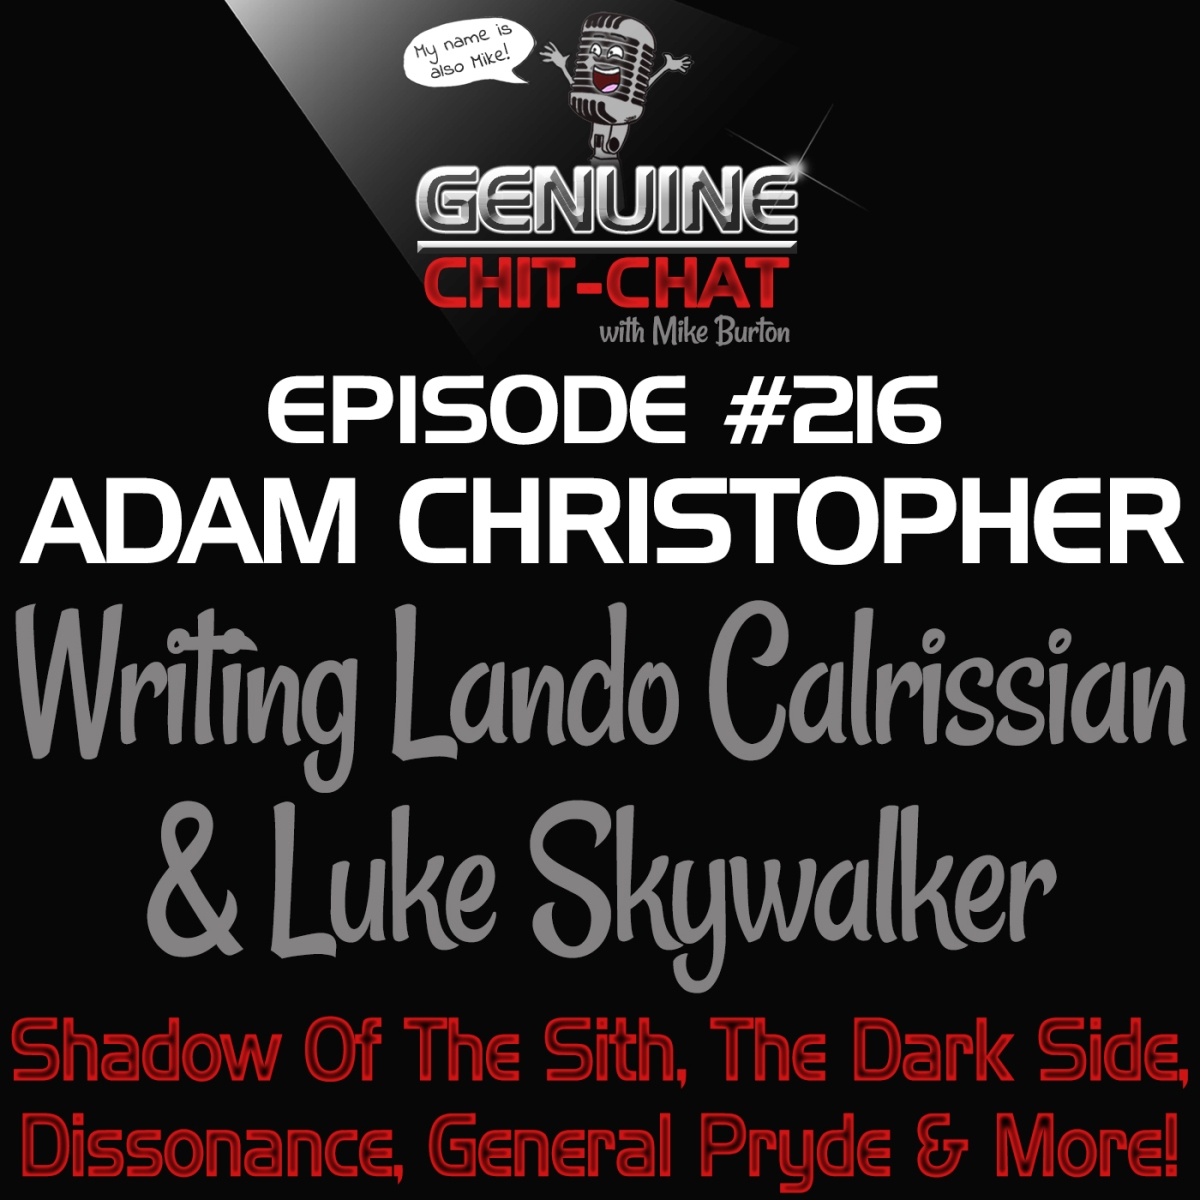 #216 – Writing Lando Calrissian & Luke Skywalker: Shadow Of The Sith, The Dark Side, Dissonance, General Pryde & More With Adam Christopher